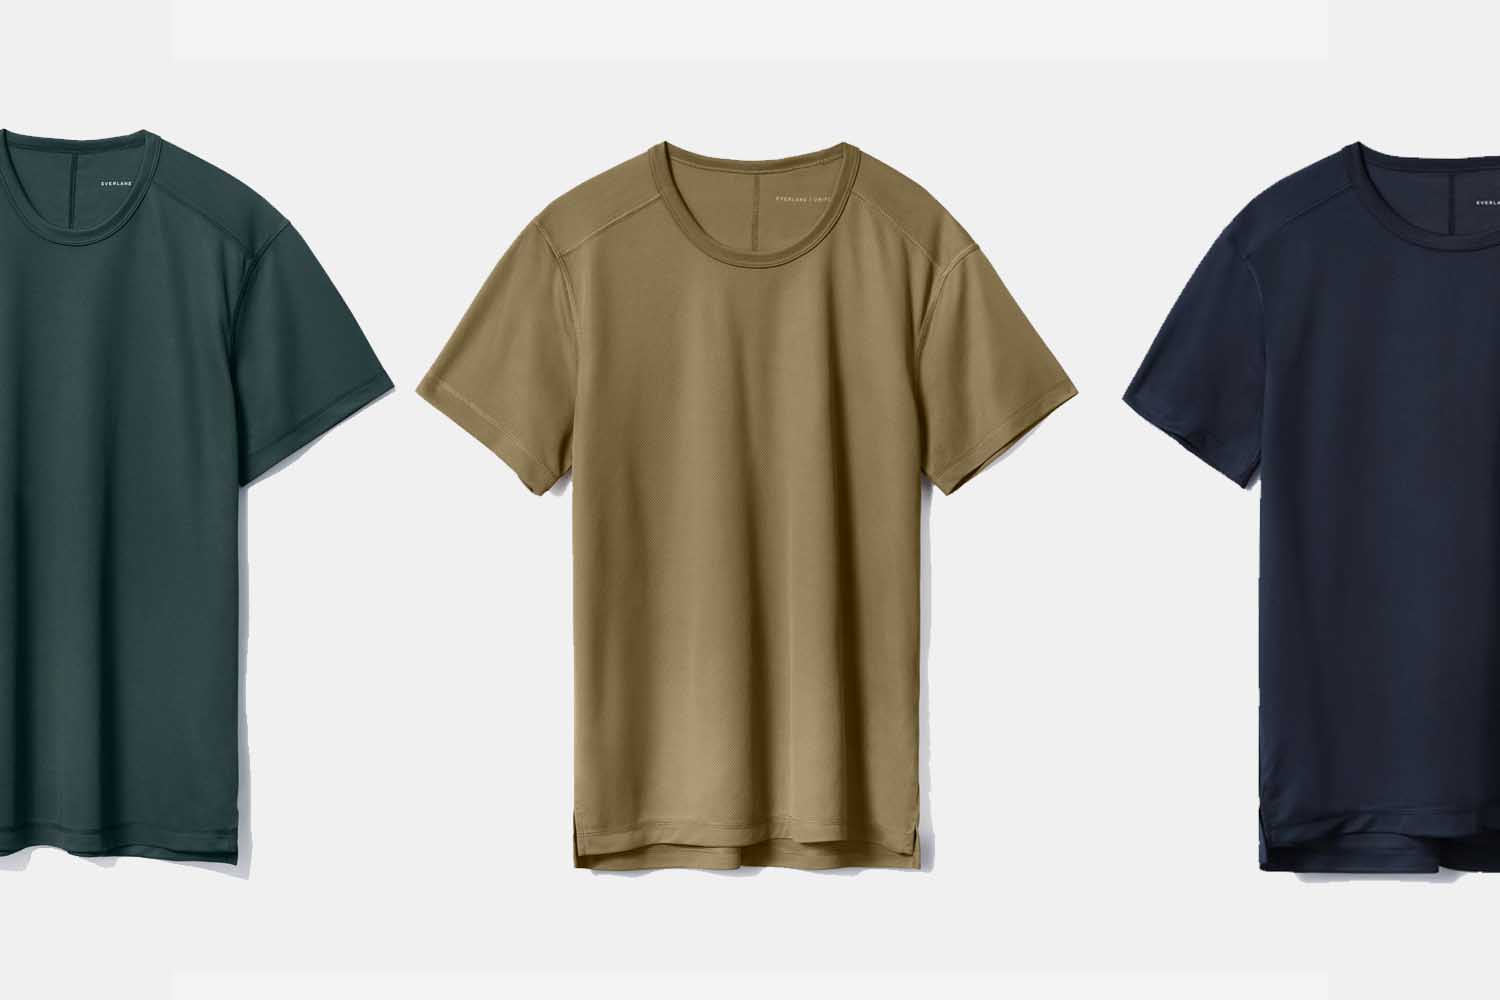 Deal: Everlane’s Performance Sport Tee Is 36% Off